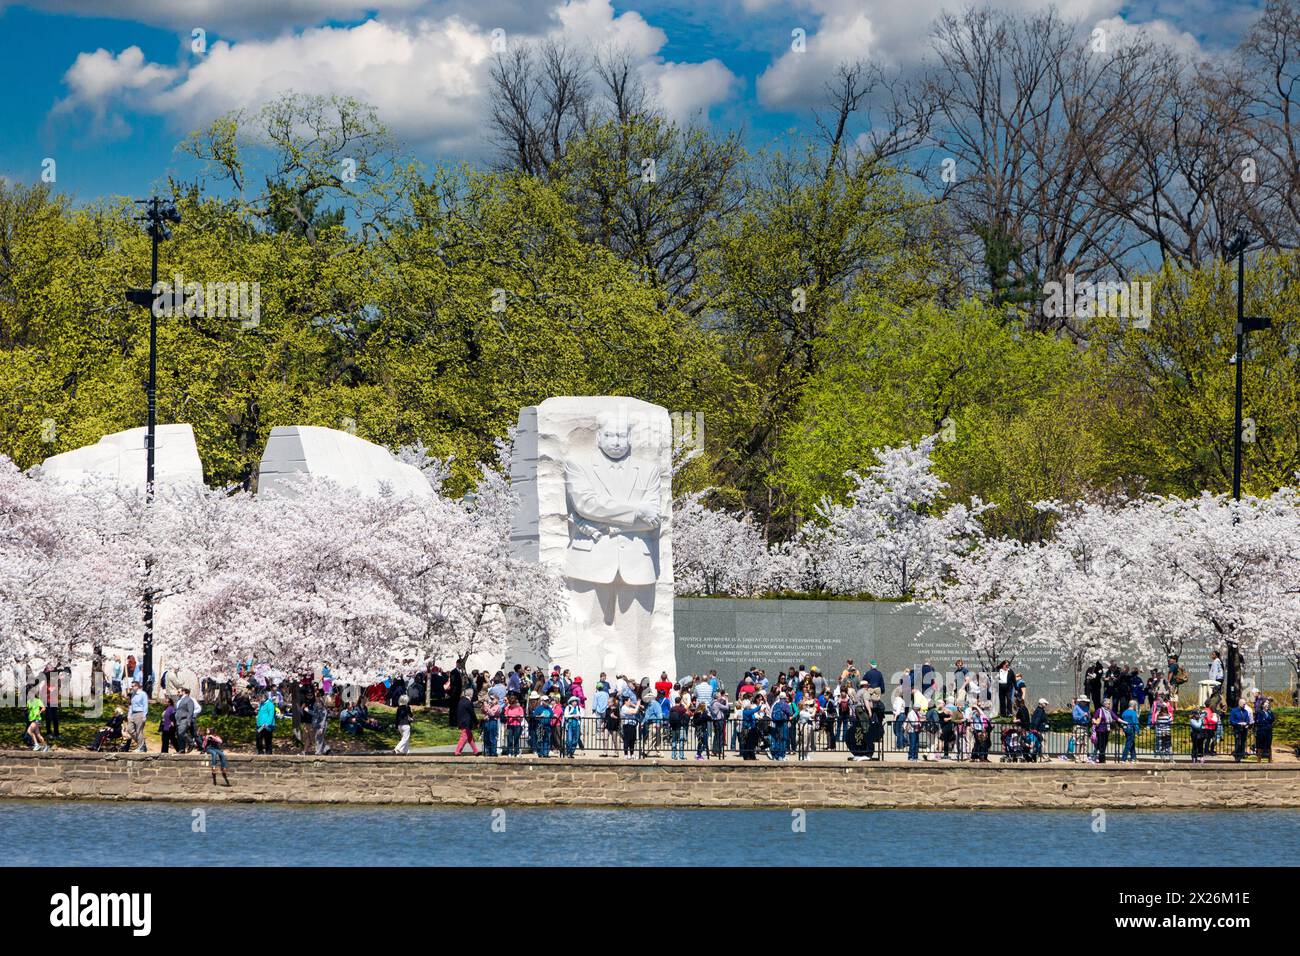 Washington, D.C., Cherry Blossoms and Martin Luther King, Jr. Memorial. Stock Photo